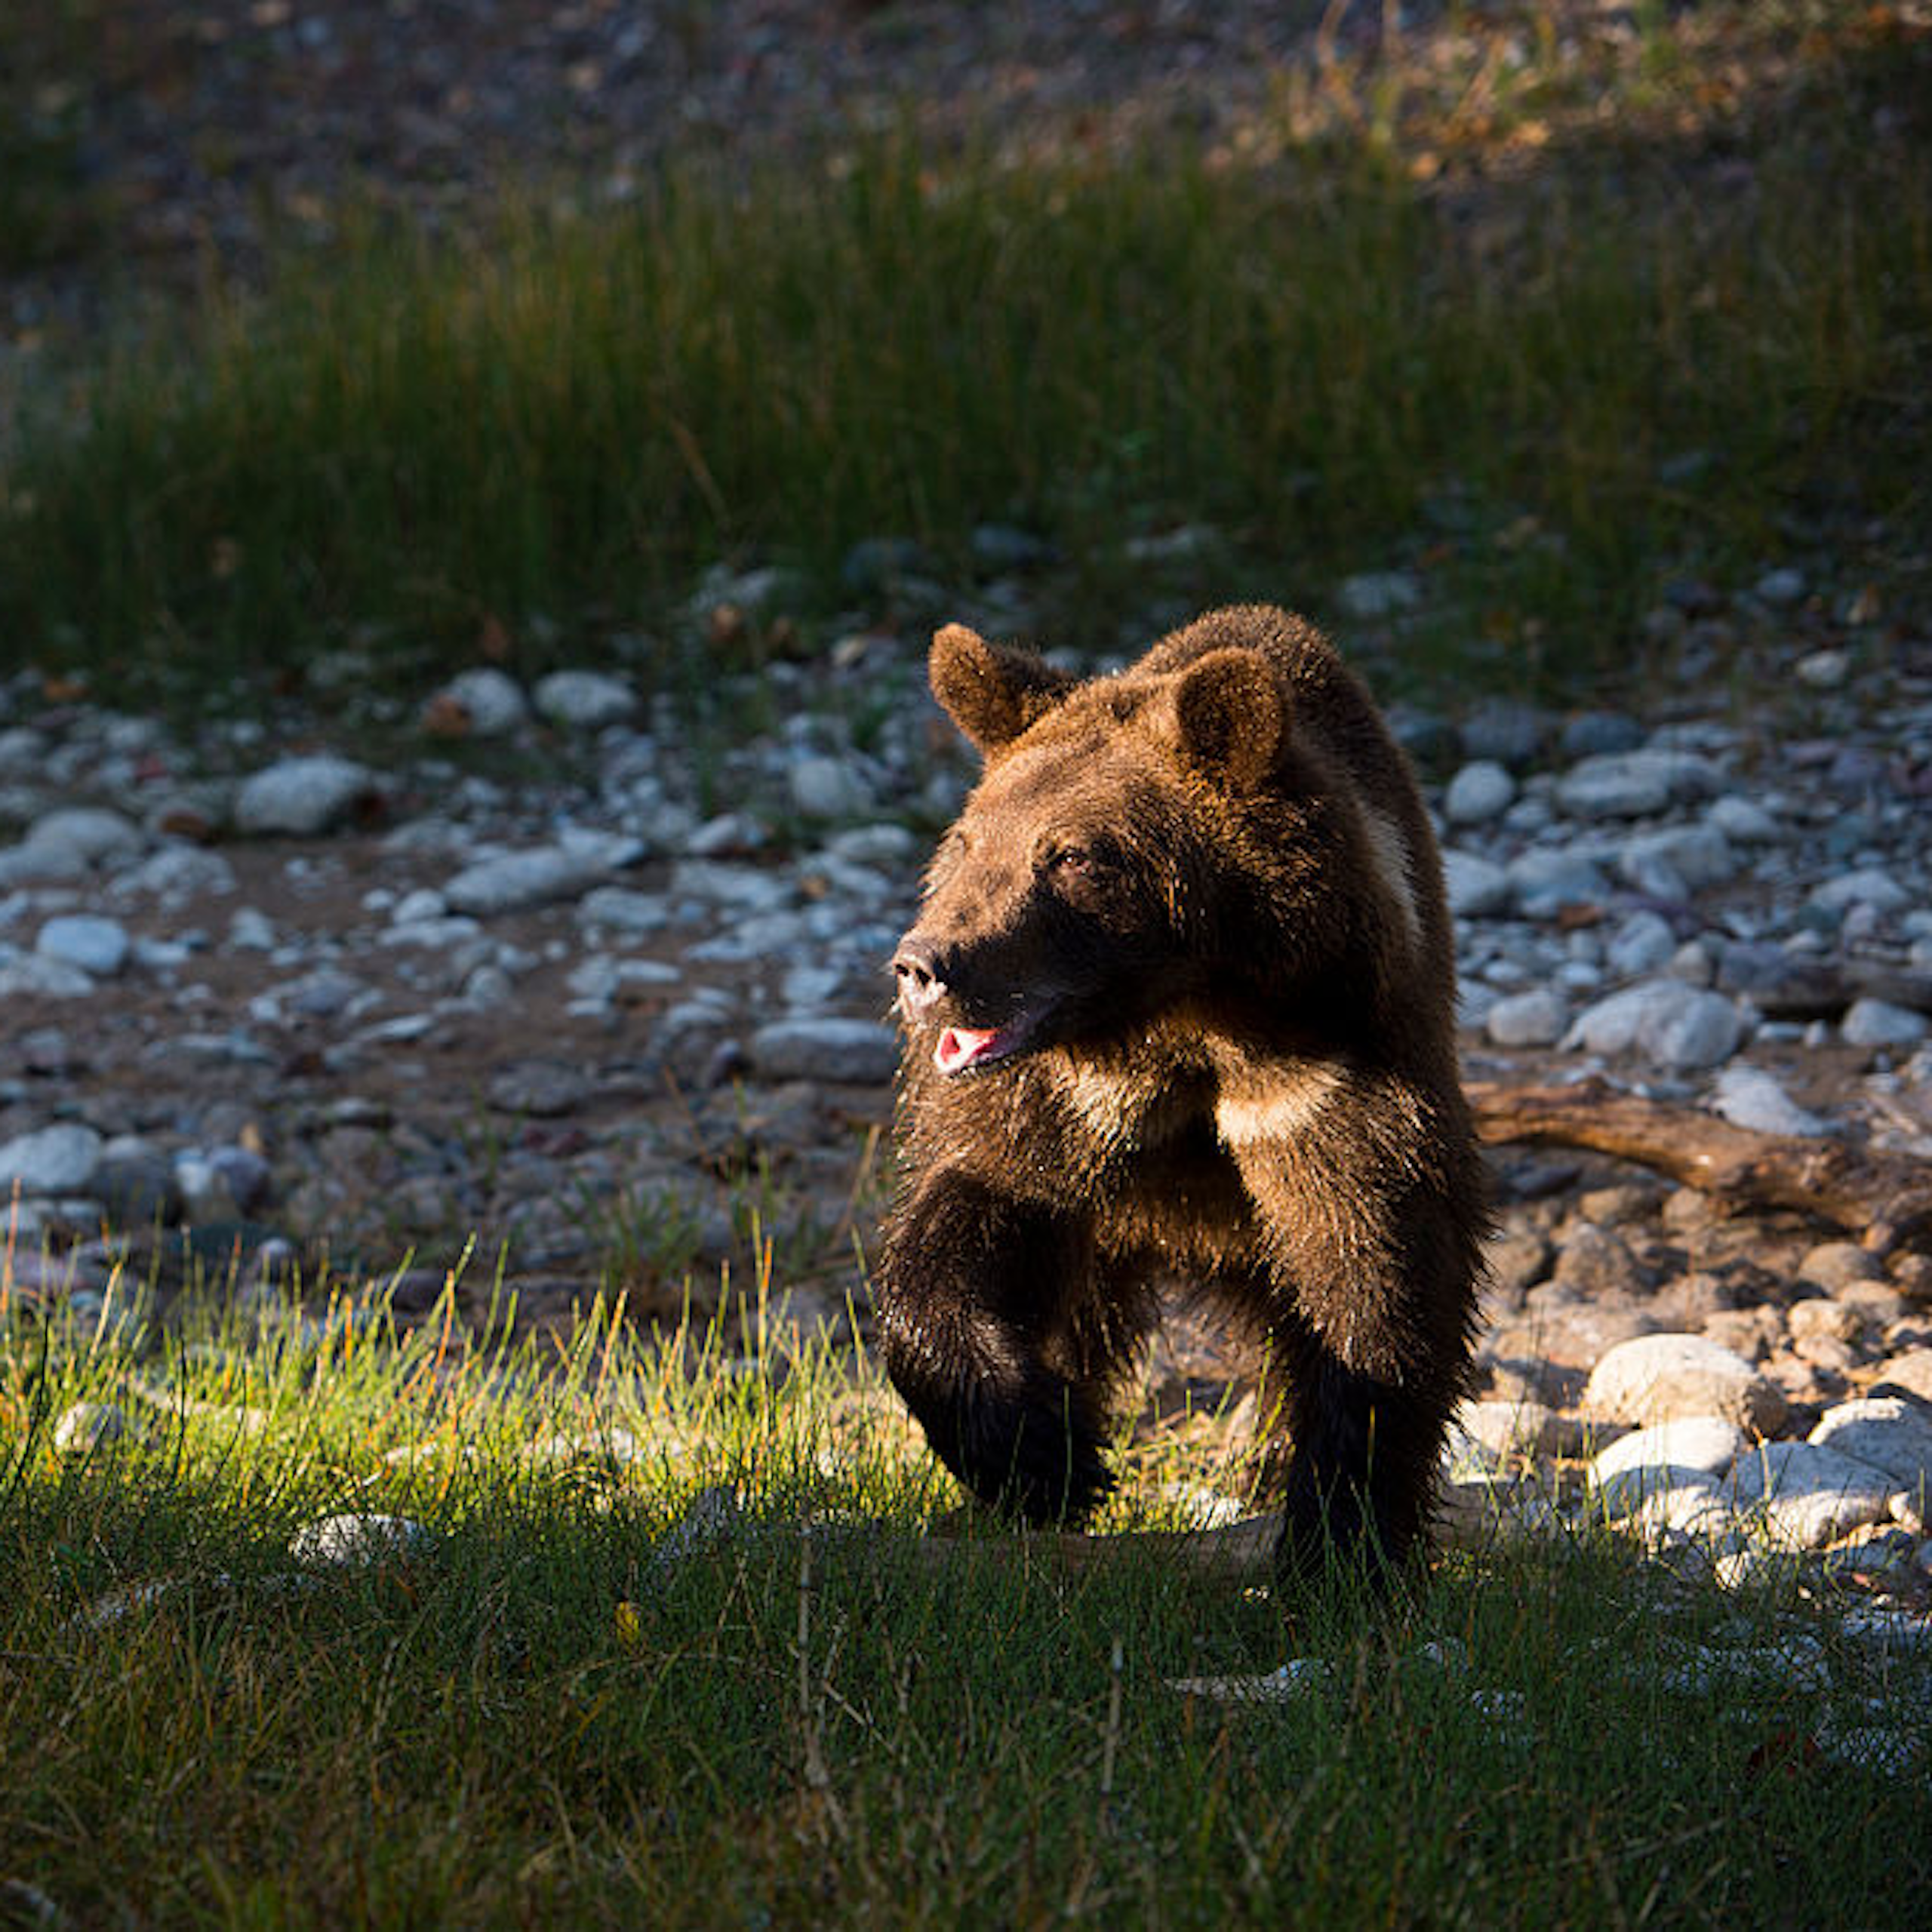 A grizzly bear walking through a patch of sunlit grass